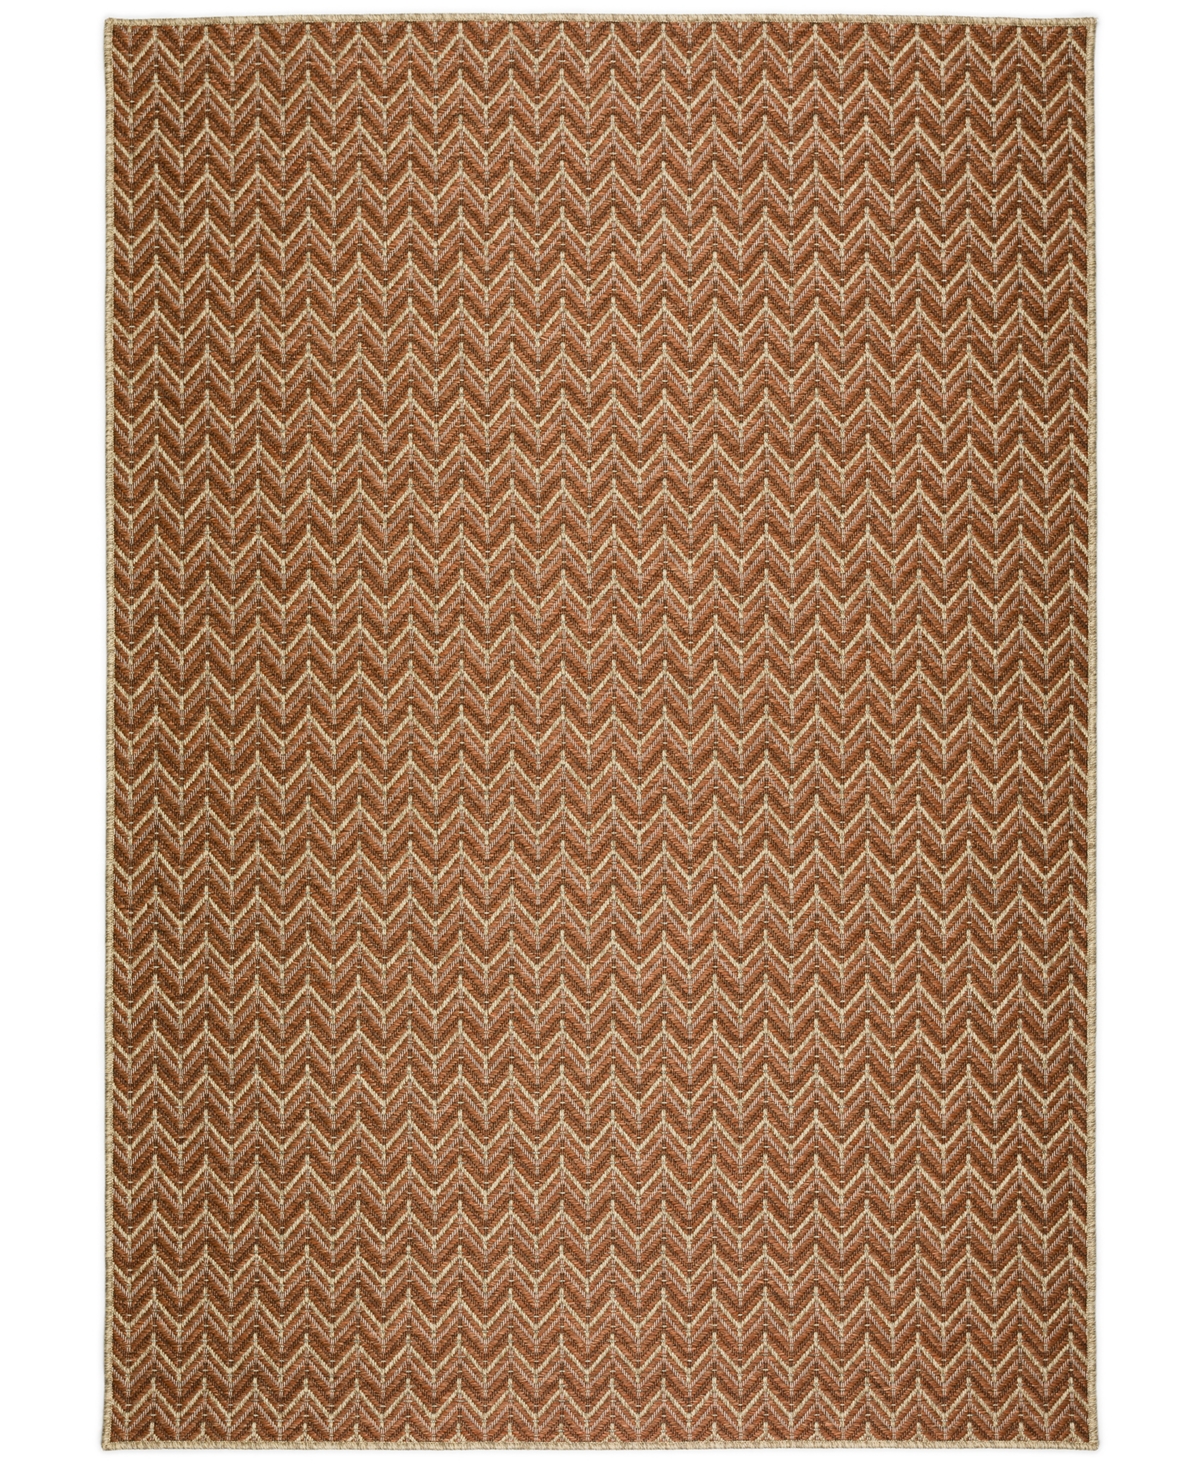 D Style Nusa Outdoor Nsa1 10' X 13' Area Rug In Paprika